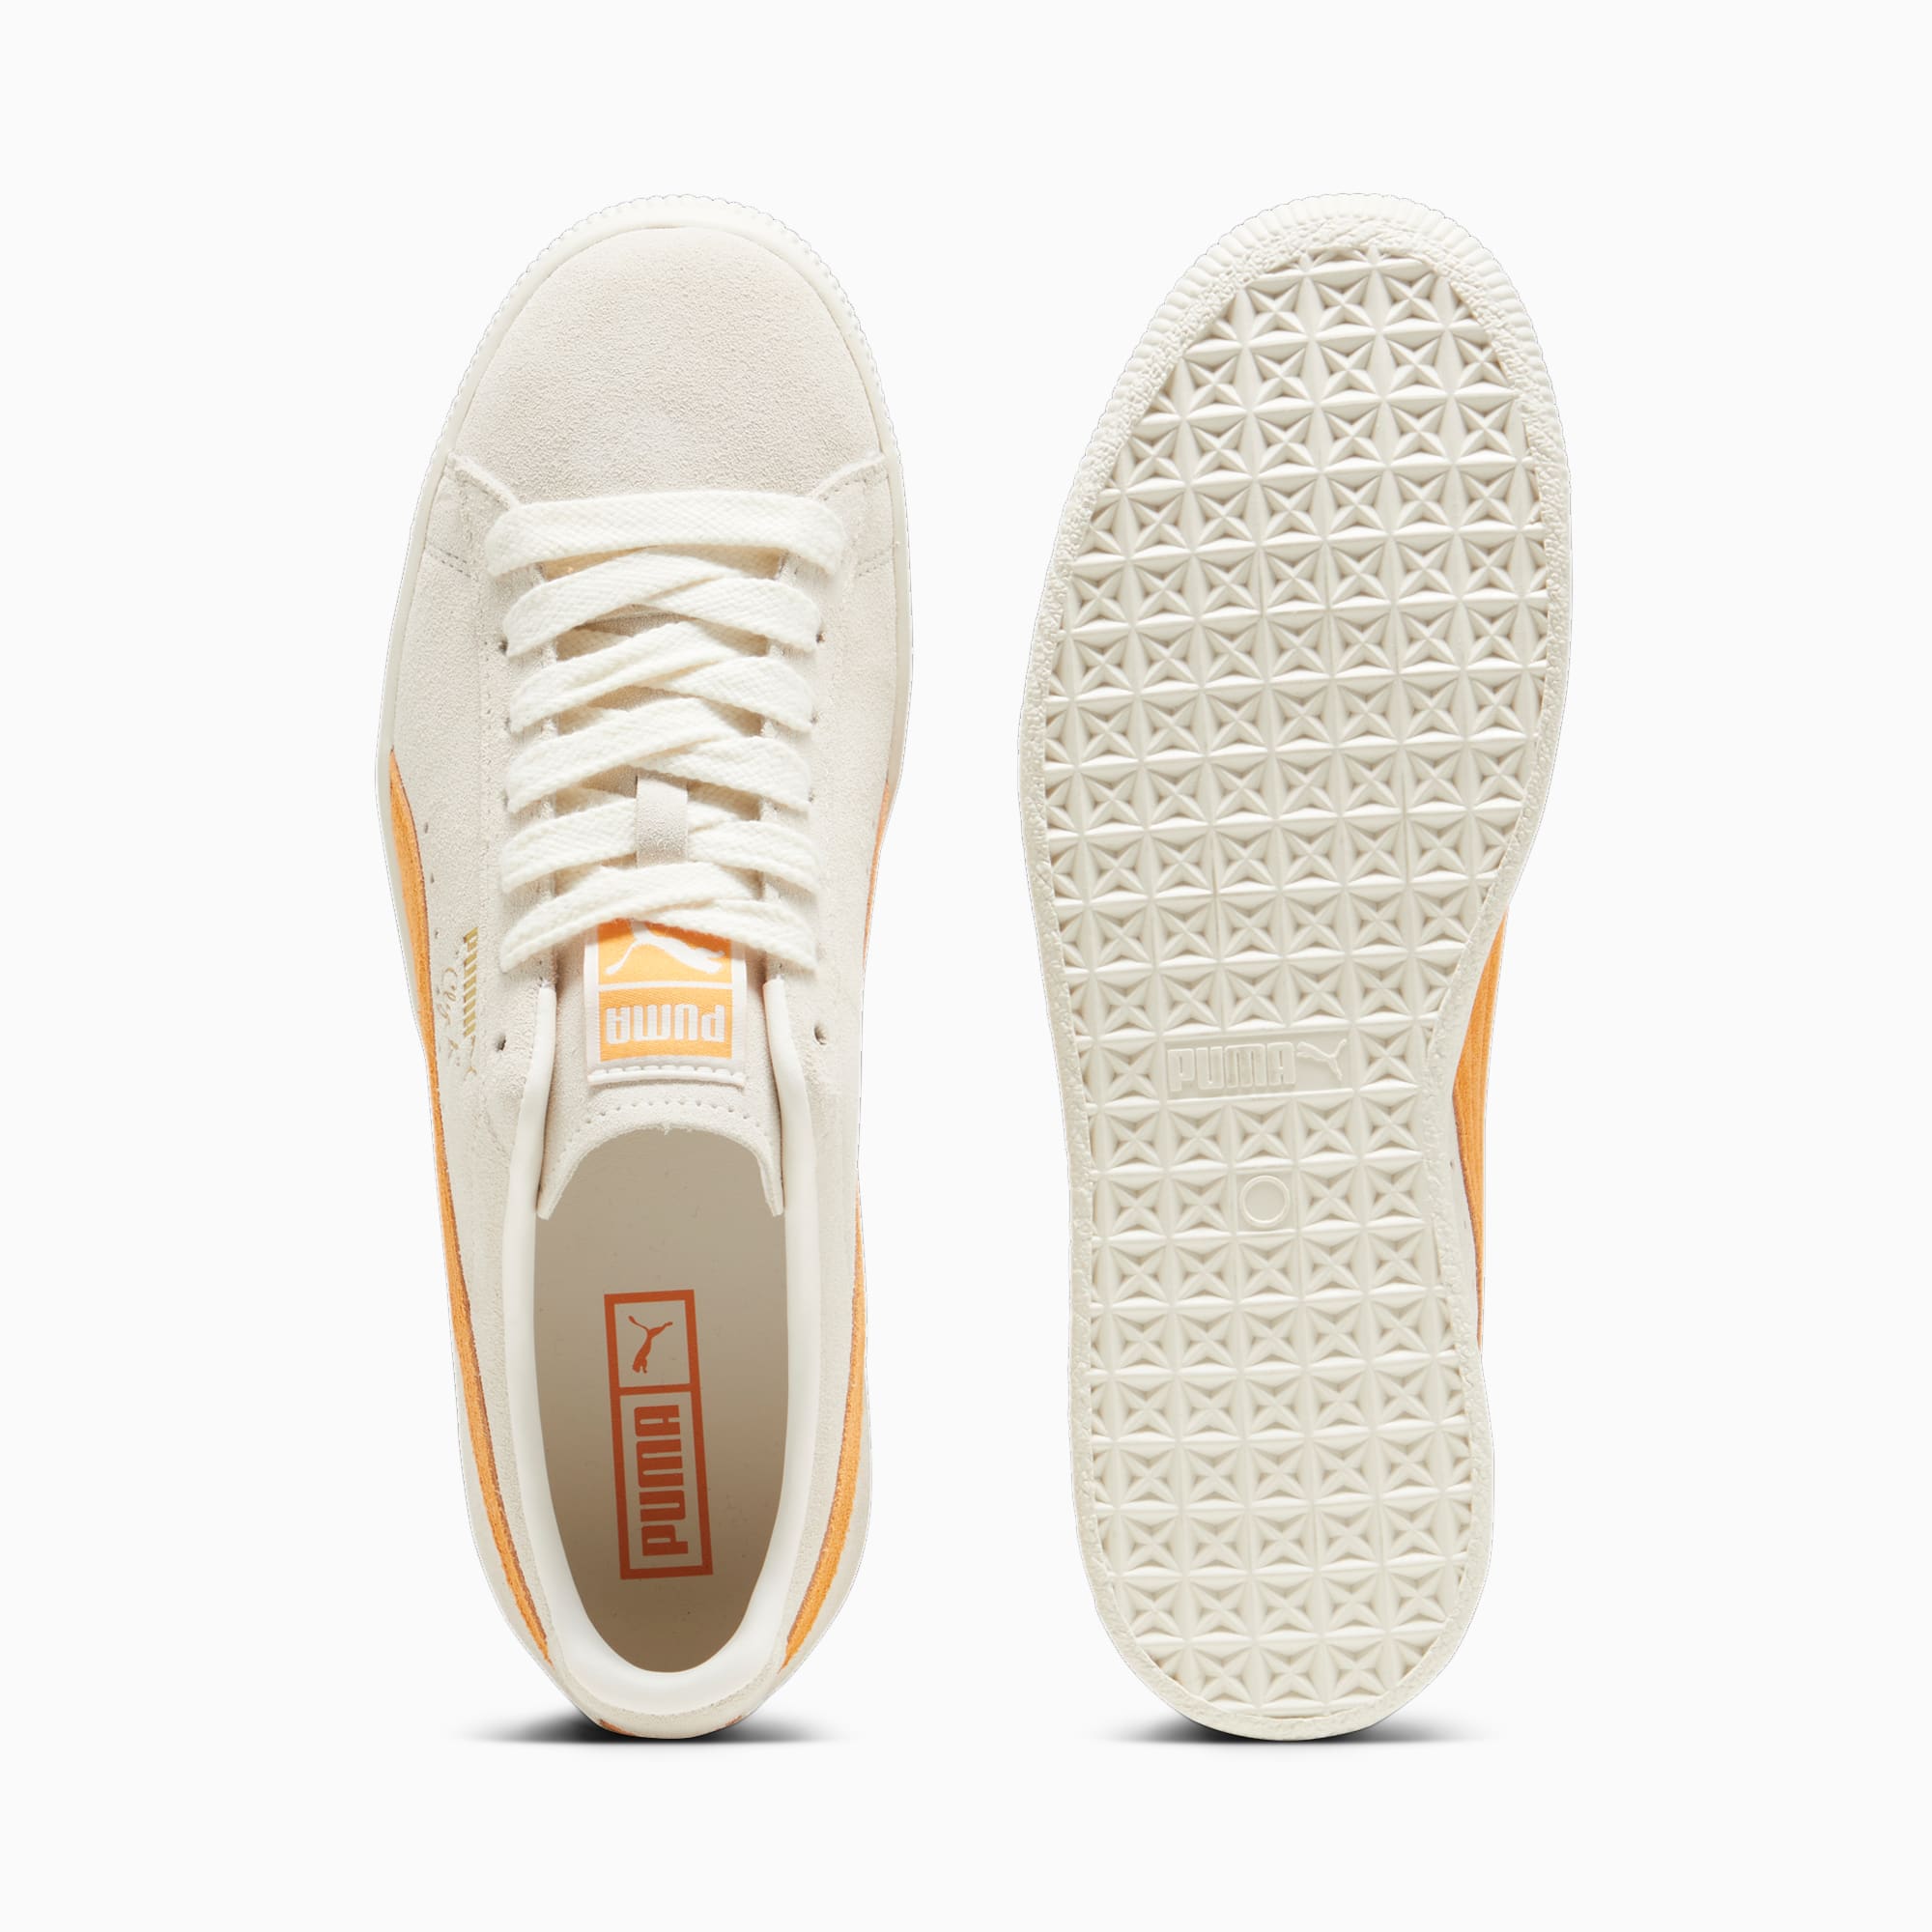 Women's PUMA Clyde OG Sneakers, Frosted Ivory/Clementine, Size 35,5, Shoes